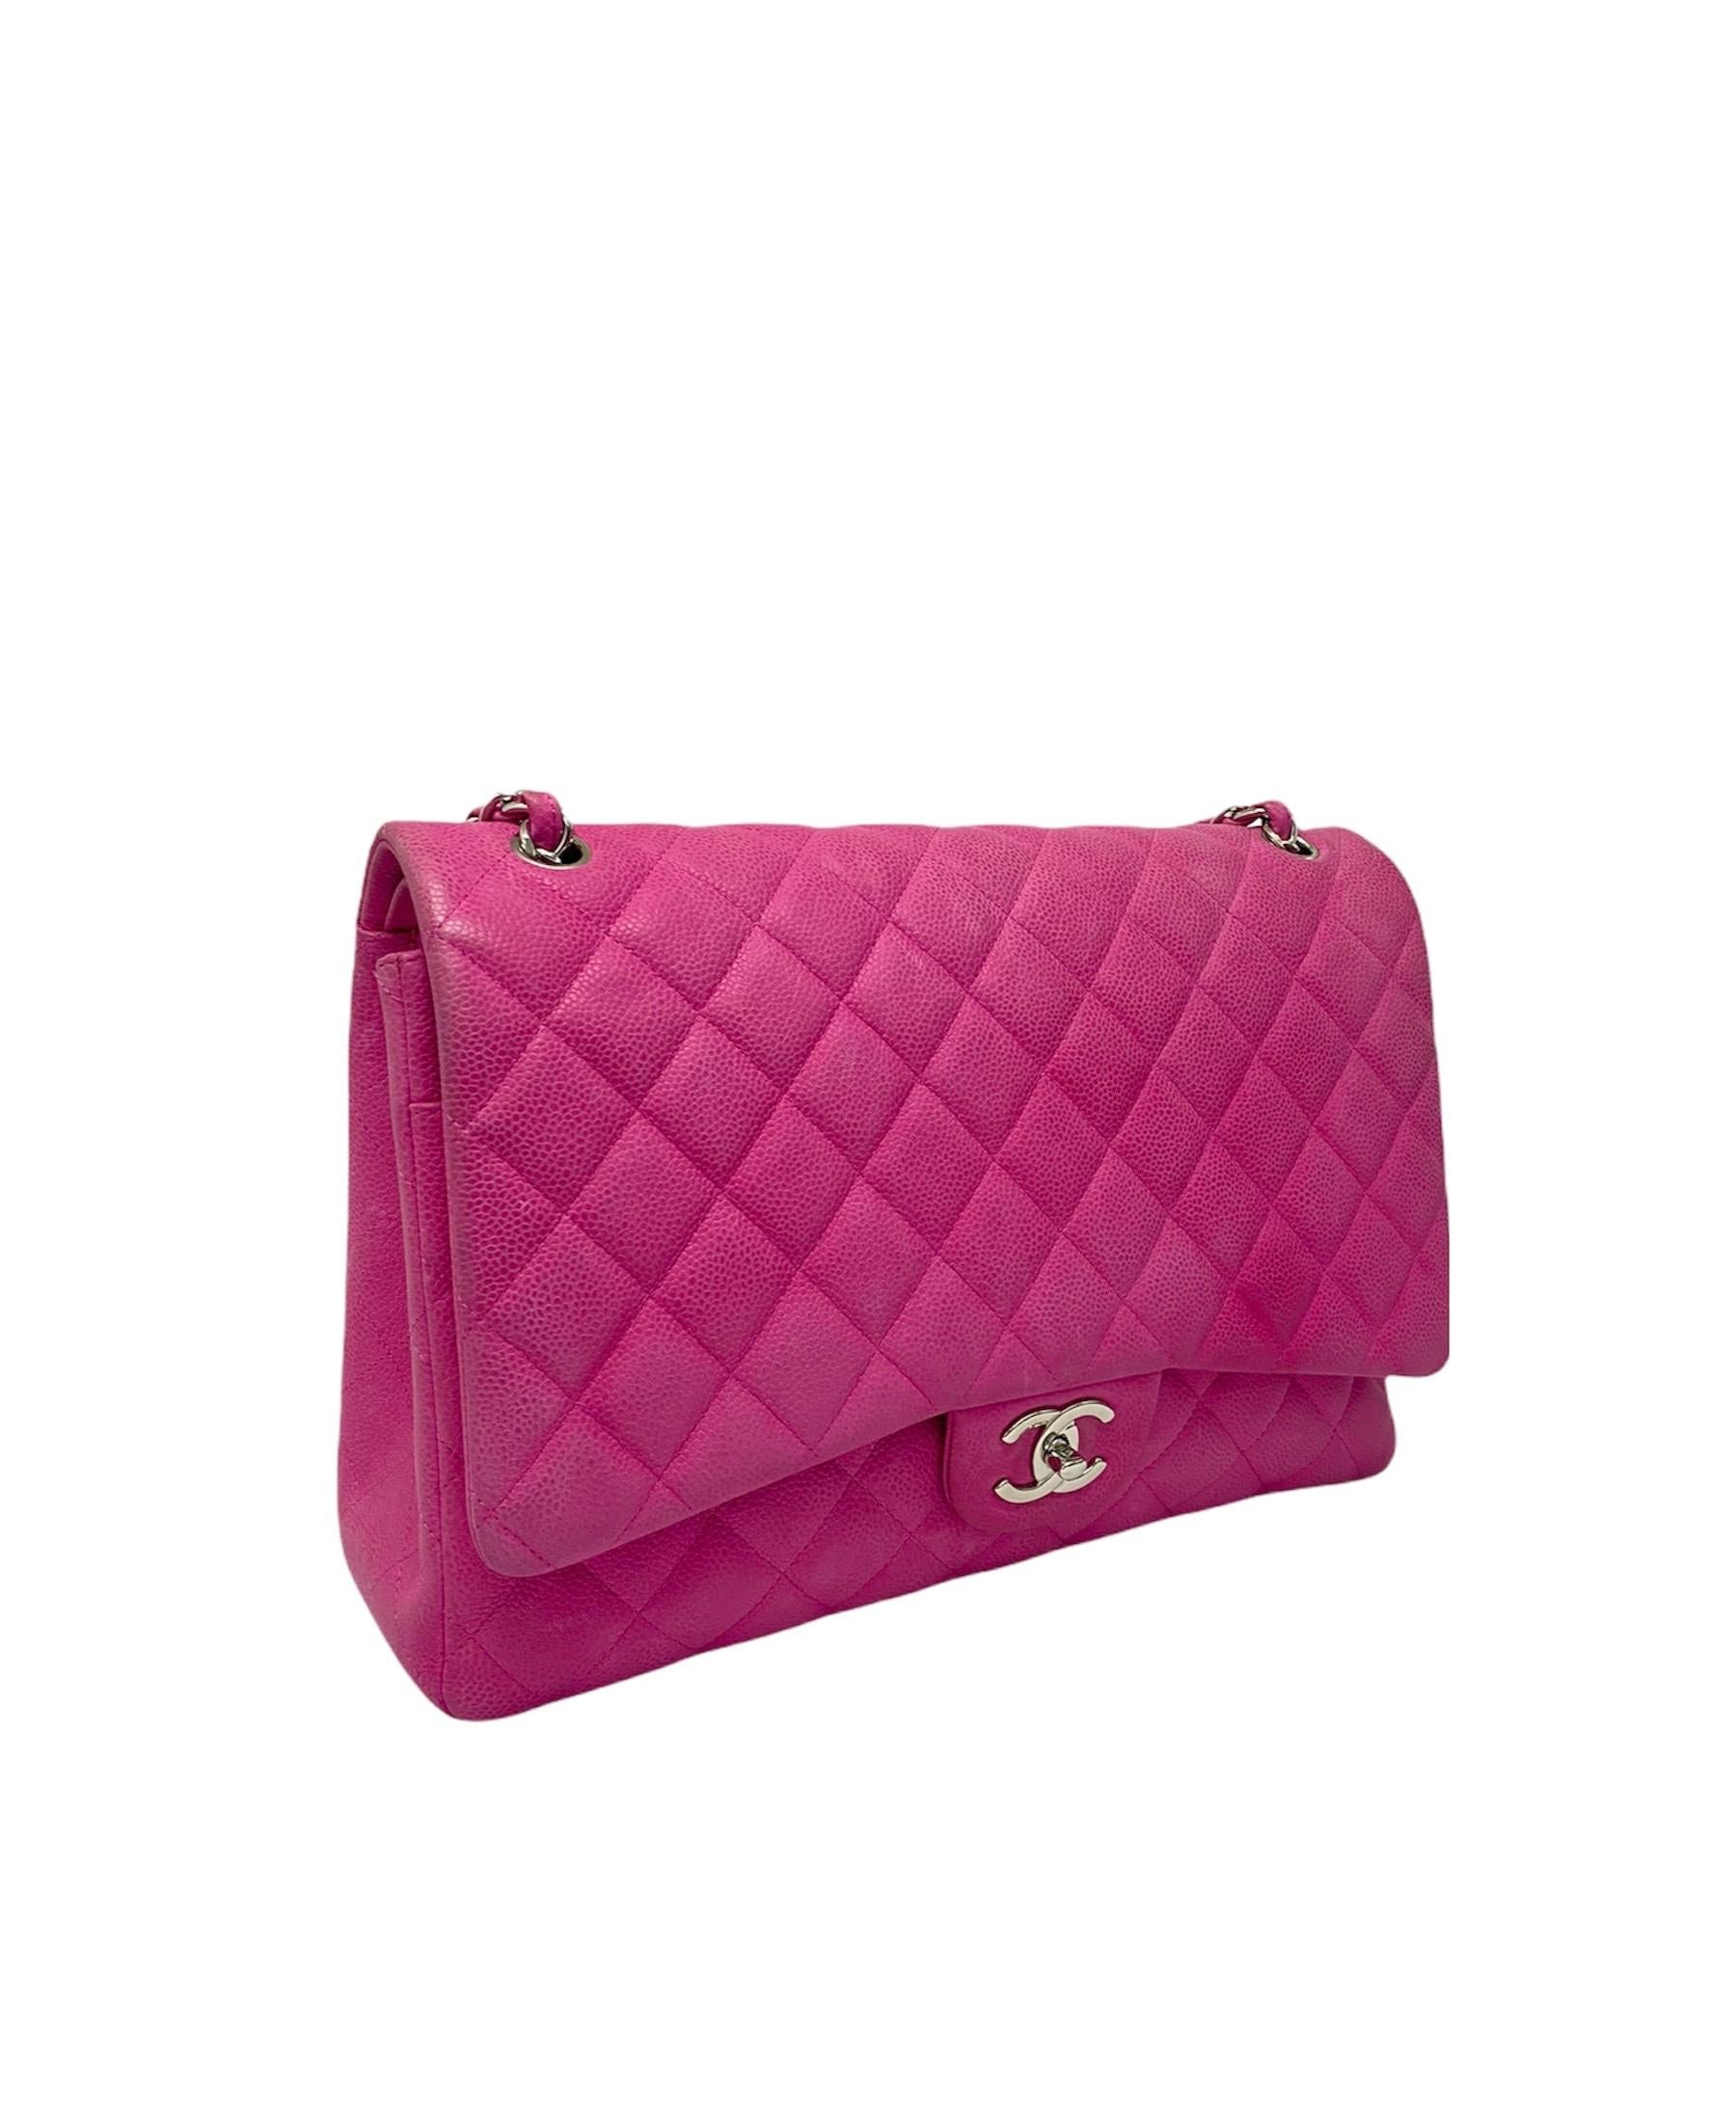 Chanel bag Maxi Jumbo Double Flap edition in fuchsia quilted leather with silver-tone hardware. The bag has two front flaps, a large external one with interlocking CC closure, and another small internal one with button closure. The interior is lined